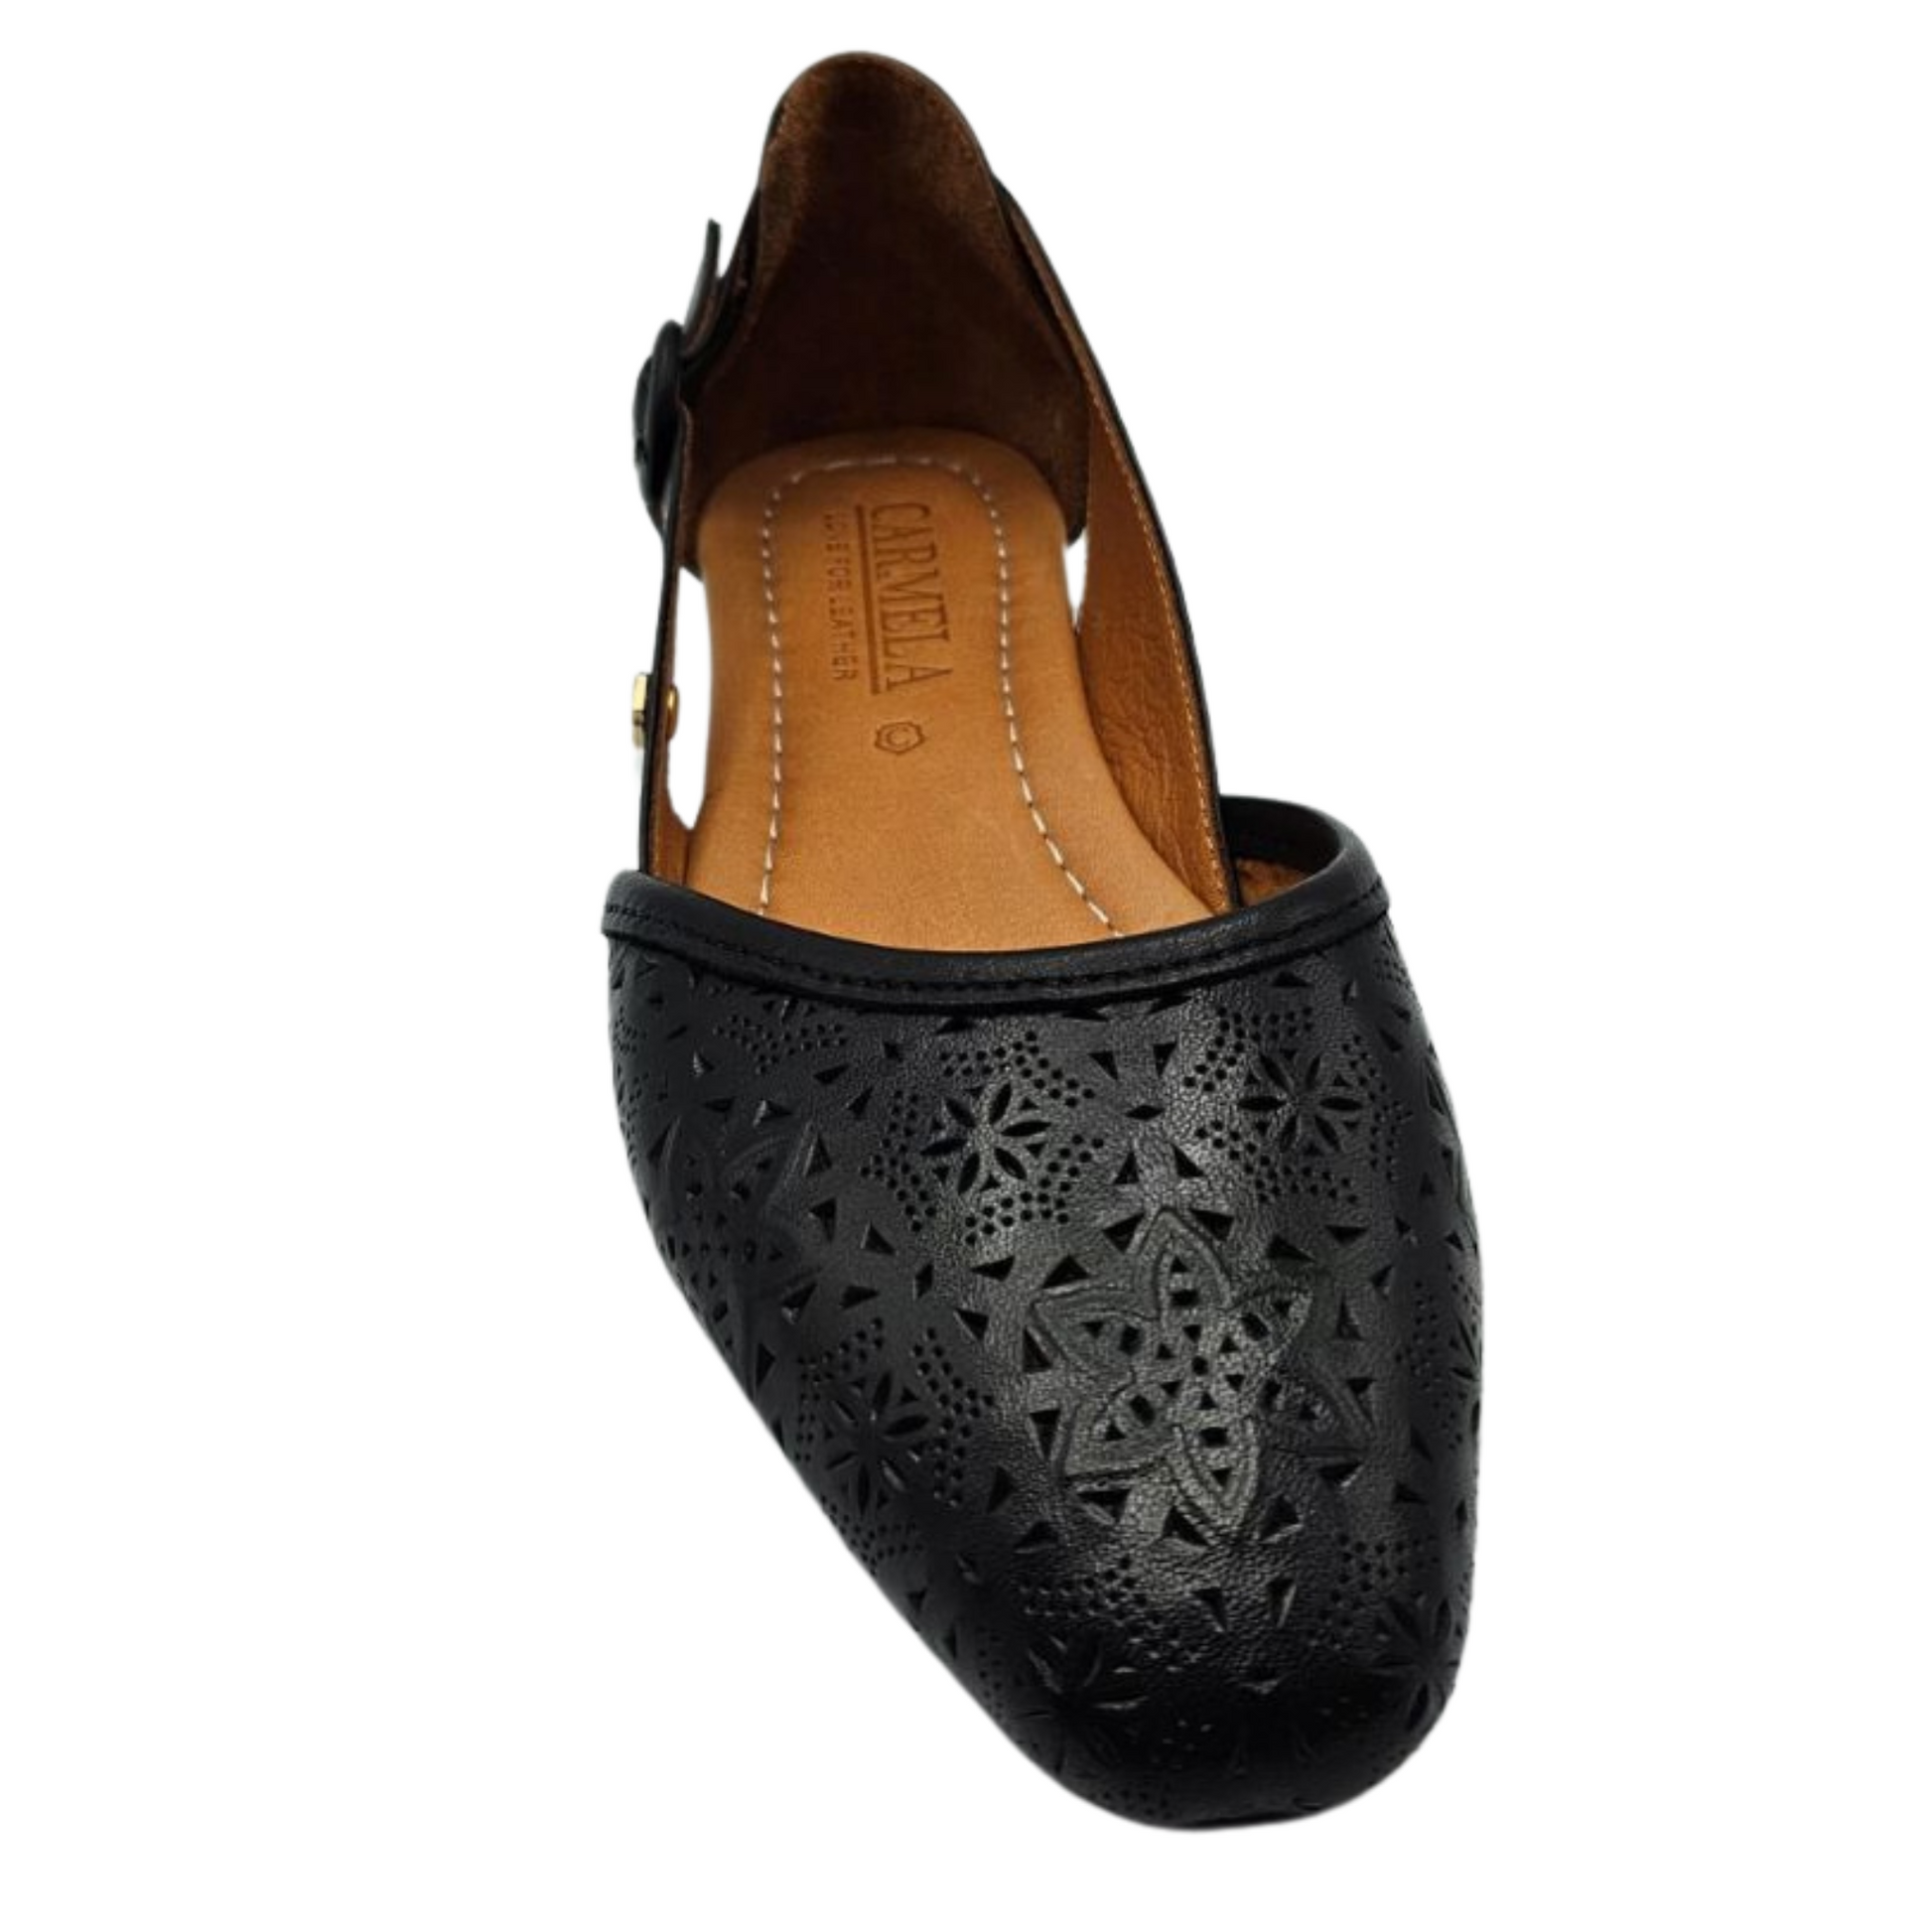 Front facing view of a black perforated leather flat with a slightly pointed toe. Leather lined and has an adjustable side strap.